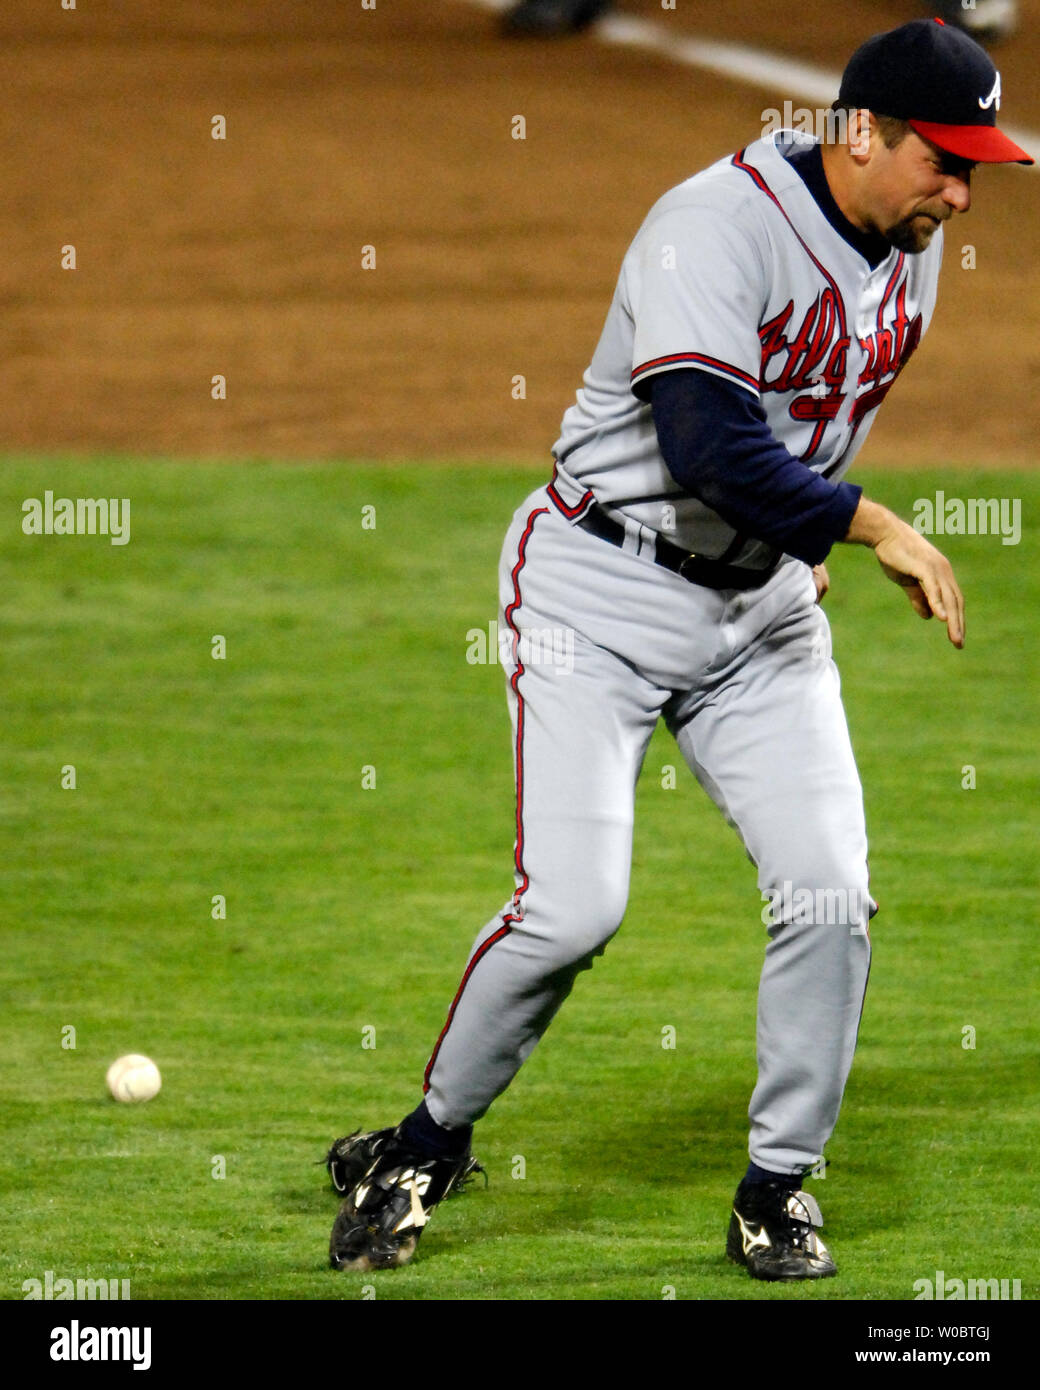 Atlanta Braves pitcher John Smoltz reacts after dislocating his right pinky finger in the seventh inning after tagging out Washington Nationals right fielder Austin Kearns on May 14, 2007 at RFK Stadium in Washington.  The Nationals defeated the Braves 2-1 on Jason Bergmann's two-hitter.  (UPI Photo/Mark Goldman) Stock Photo